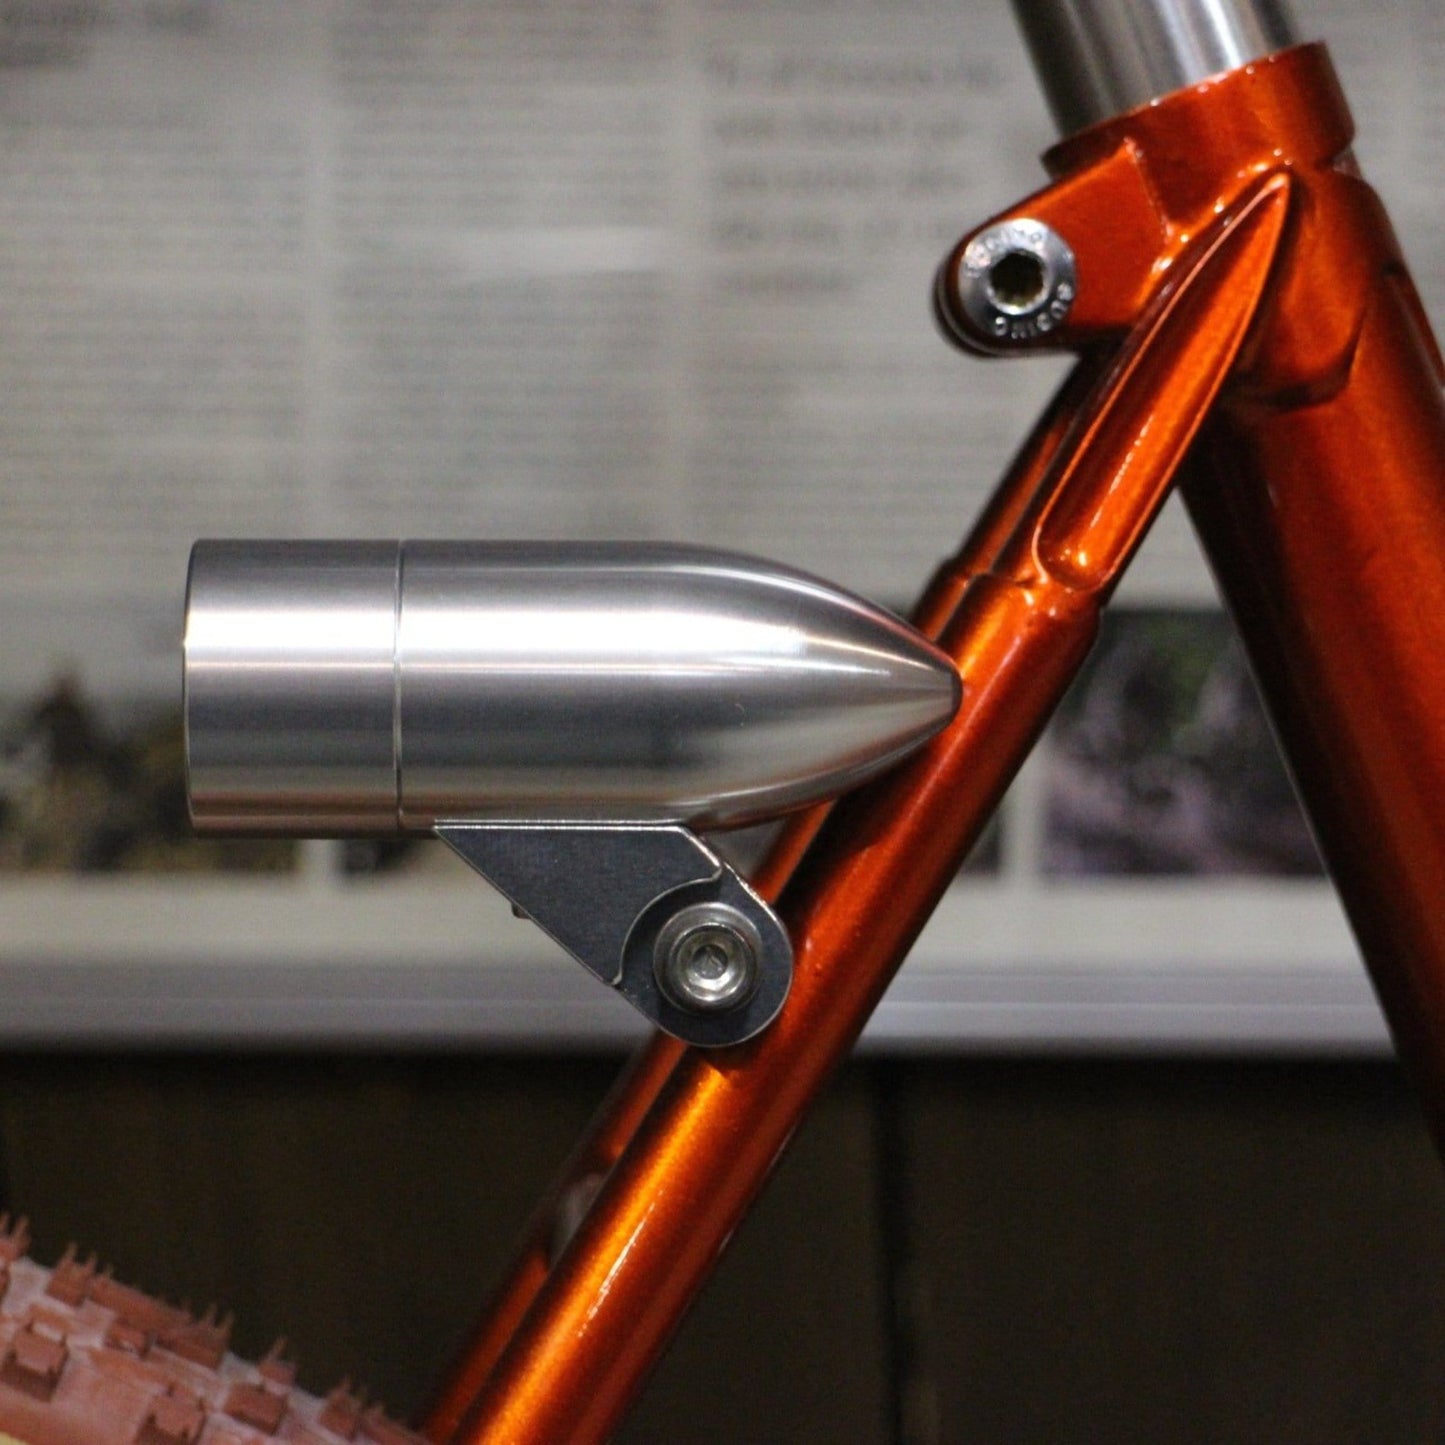 Silver Rindow bullet rear bicycle light mounted on an orange bike with the universal mount